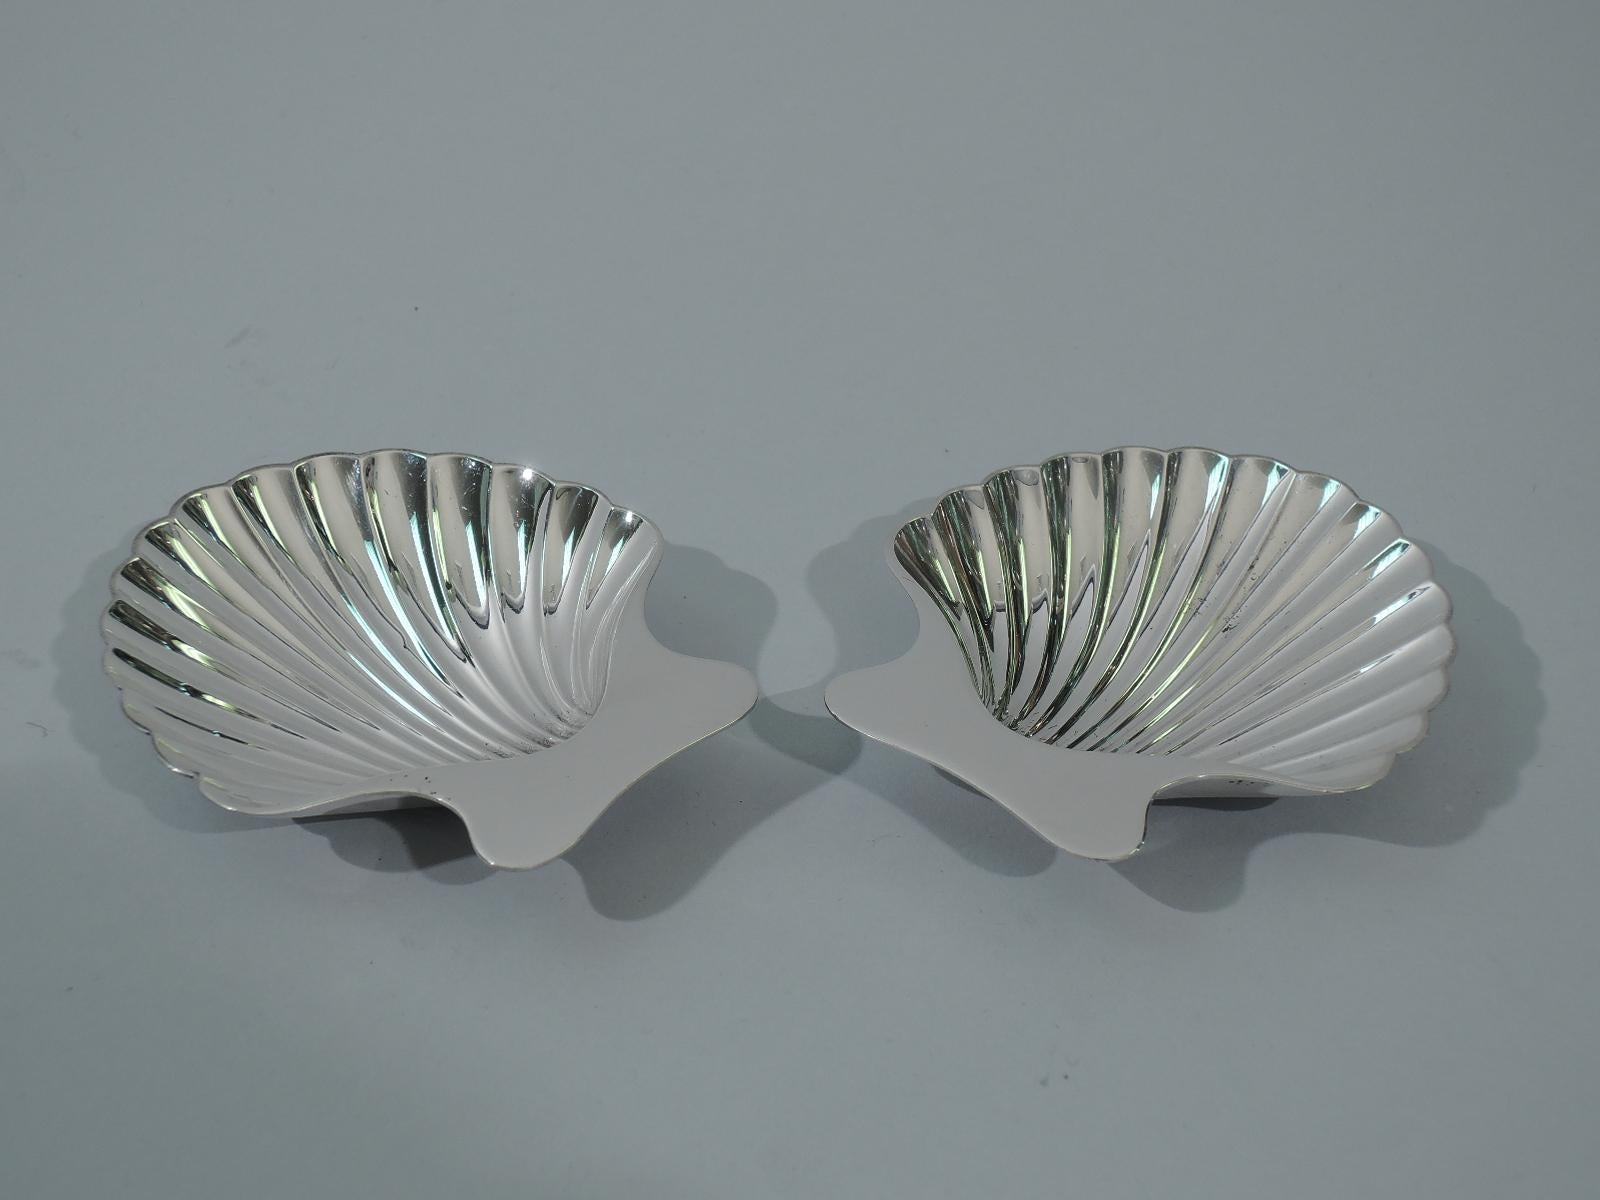 Set of 6 modern sterling silver scallop-shell nut dishes. Made by Tiffany & Co. in New York. Each: Dense flutes and plain handle. Rests on 2 ball feet. Hallmarked. Total weight: 6.7 troy ounces.